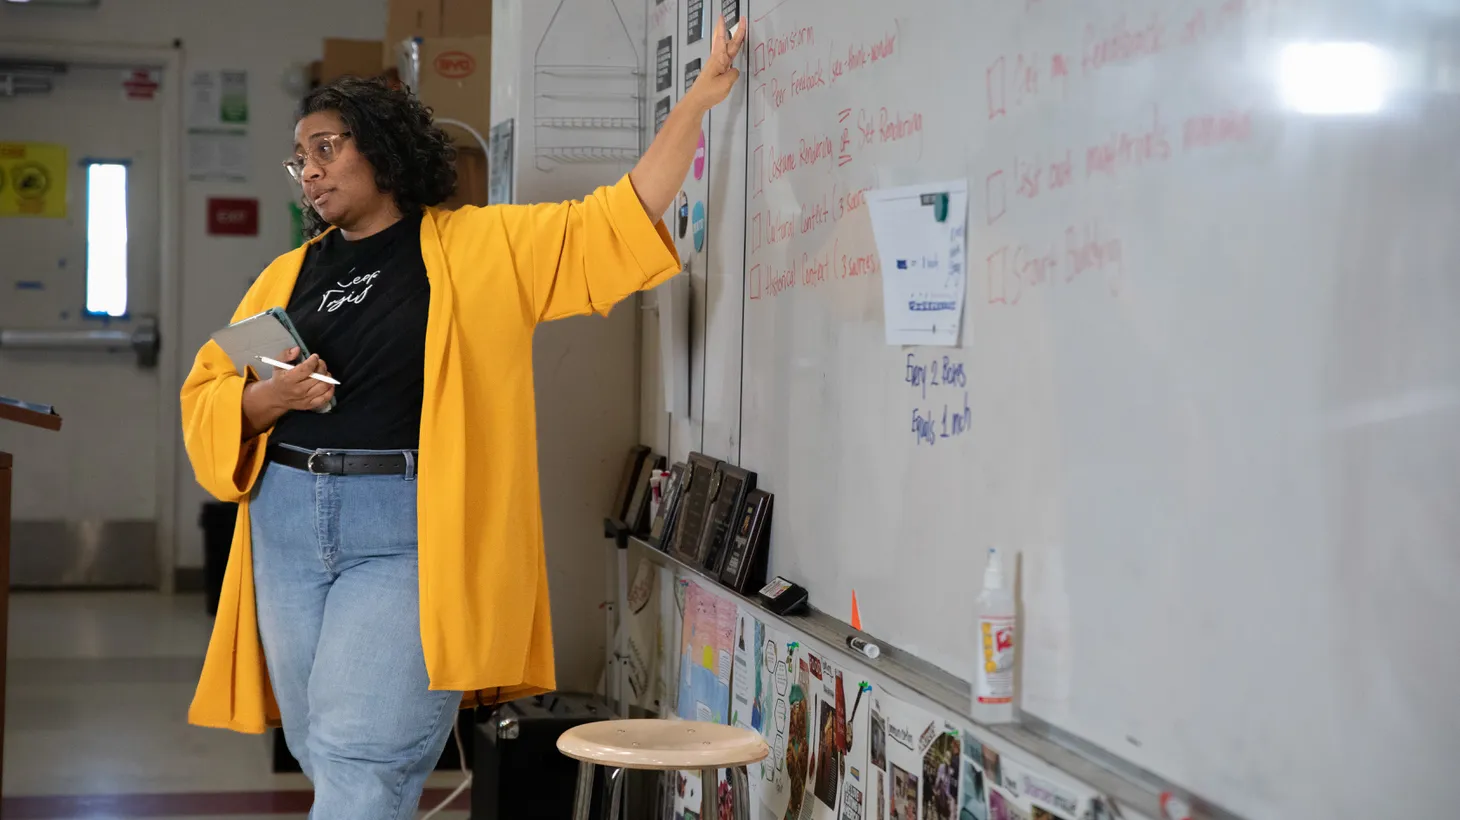 Former LAUSD theater teacher Estella Owoimaha-Church gives instructions in her classroom at Edward R. Roybal Learning Center. She left the profession in 2022.